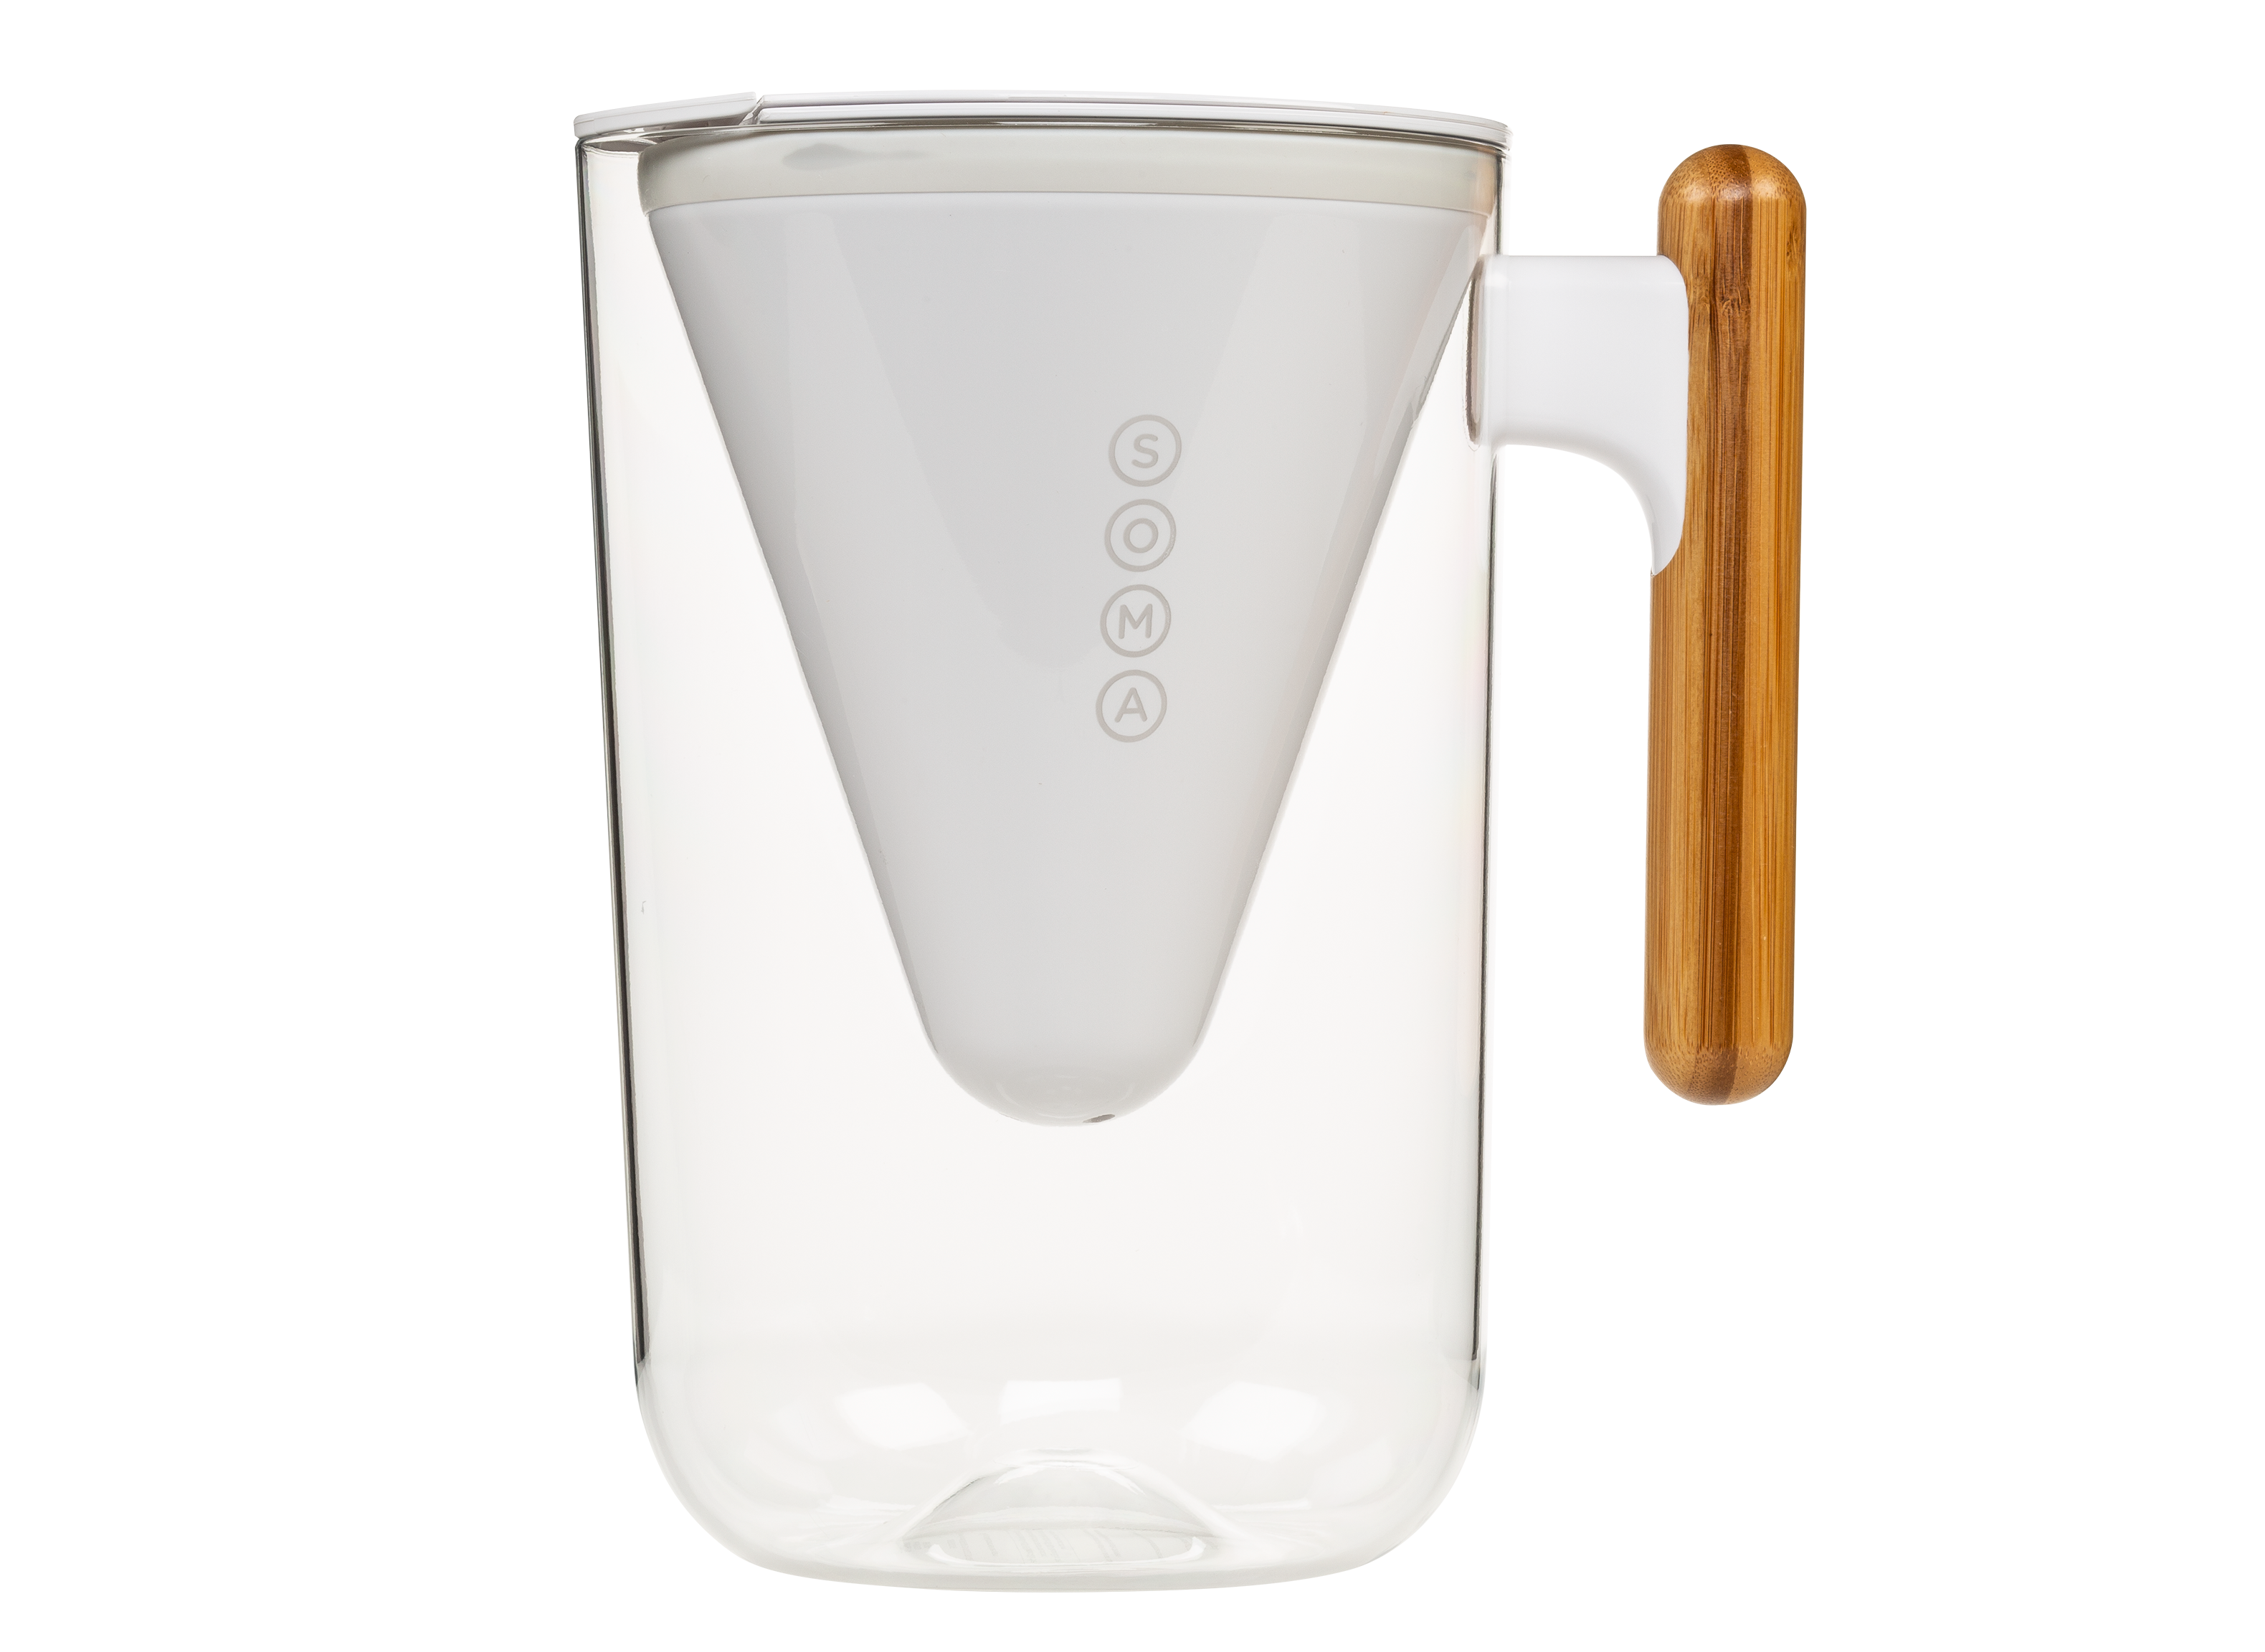 Fed Up - Soma Water filtered pitcher removes heavy metals like